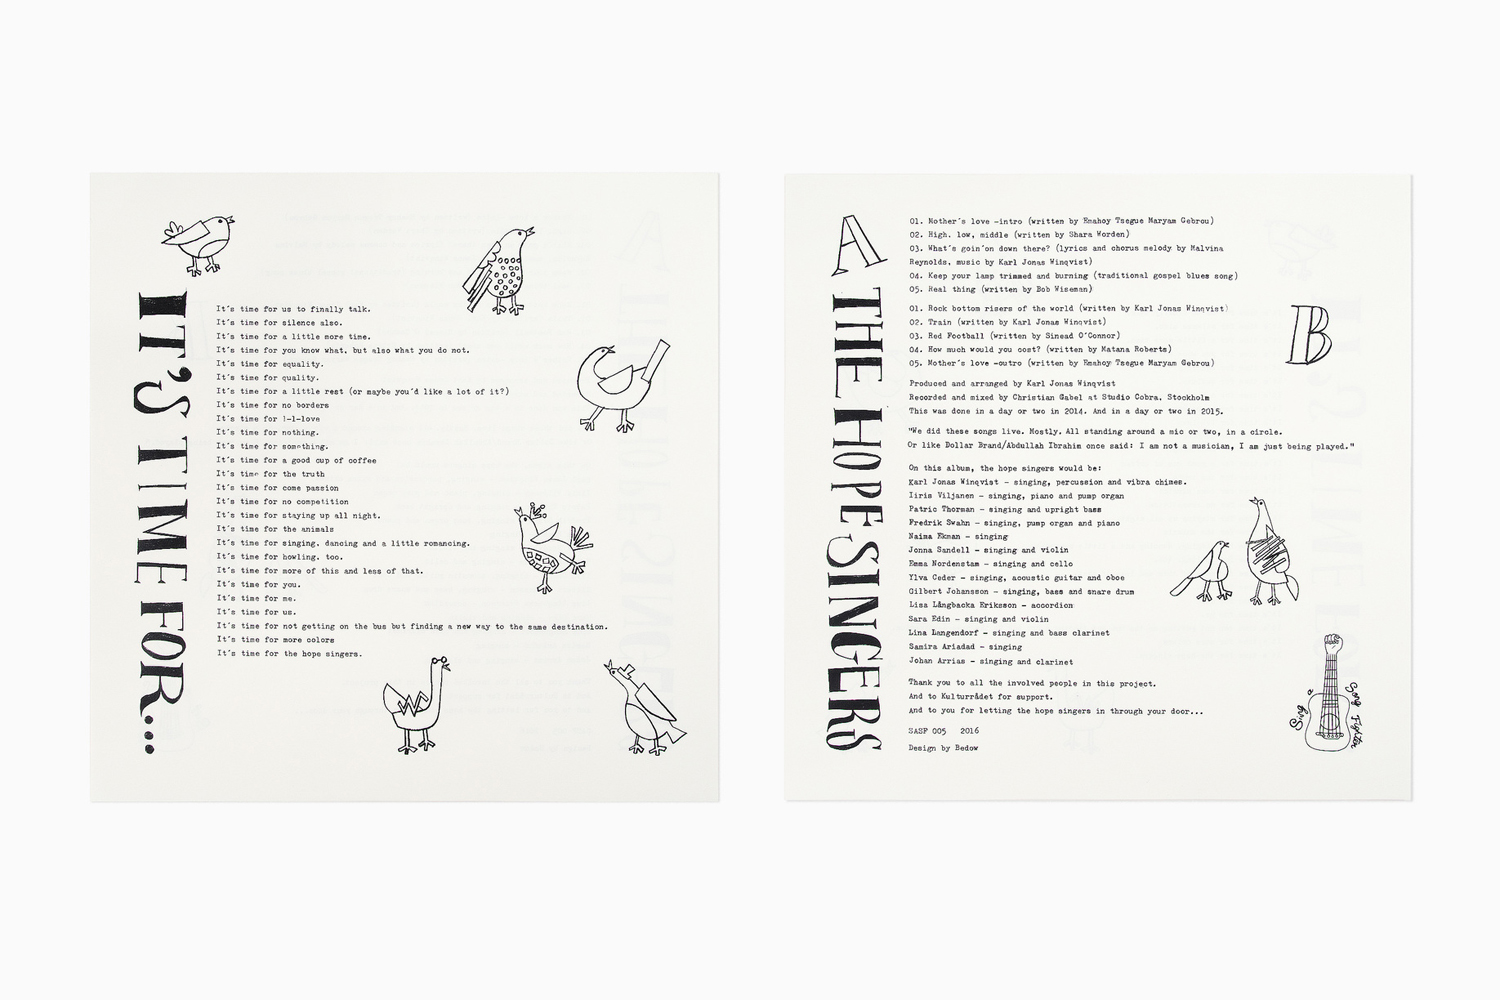 Custom type and illustration for The Hope Singers by Swedish graphic design studio Bedow